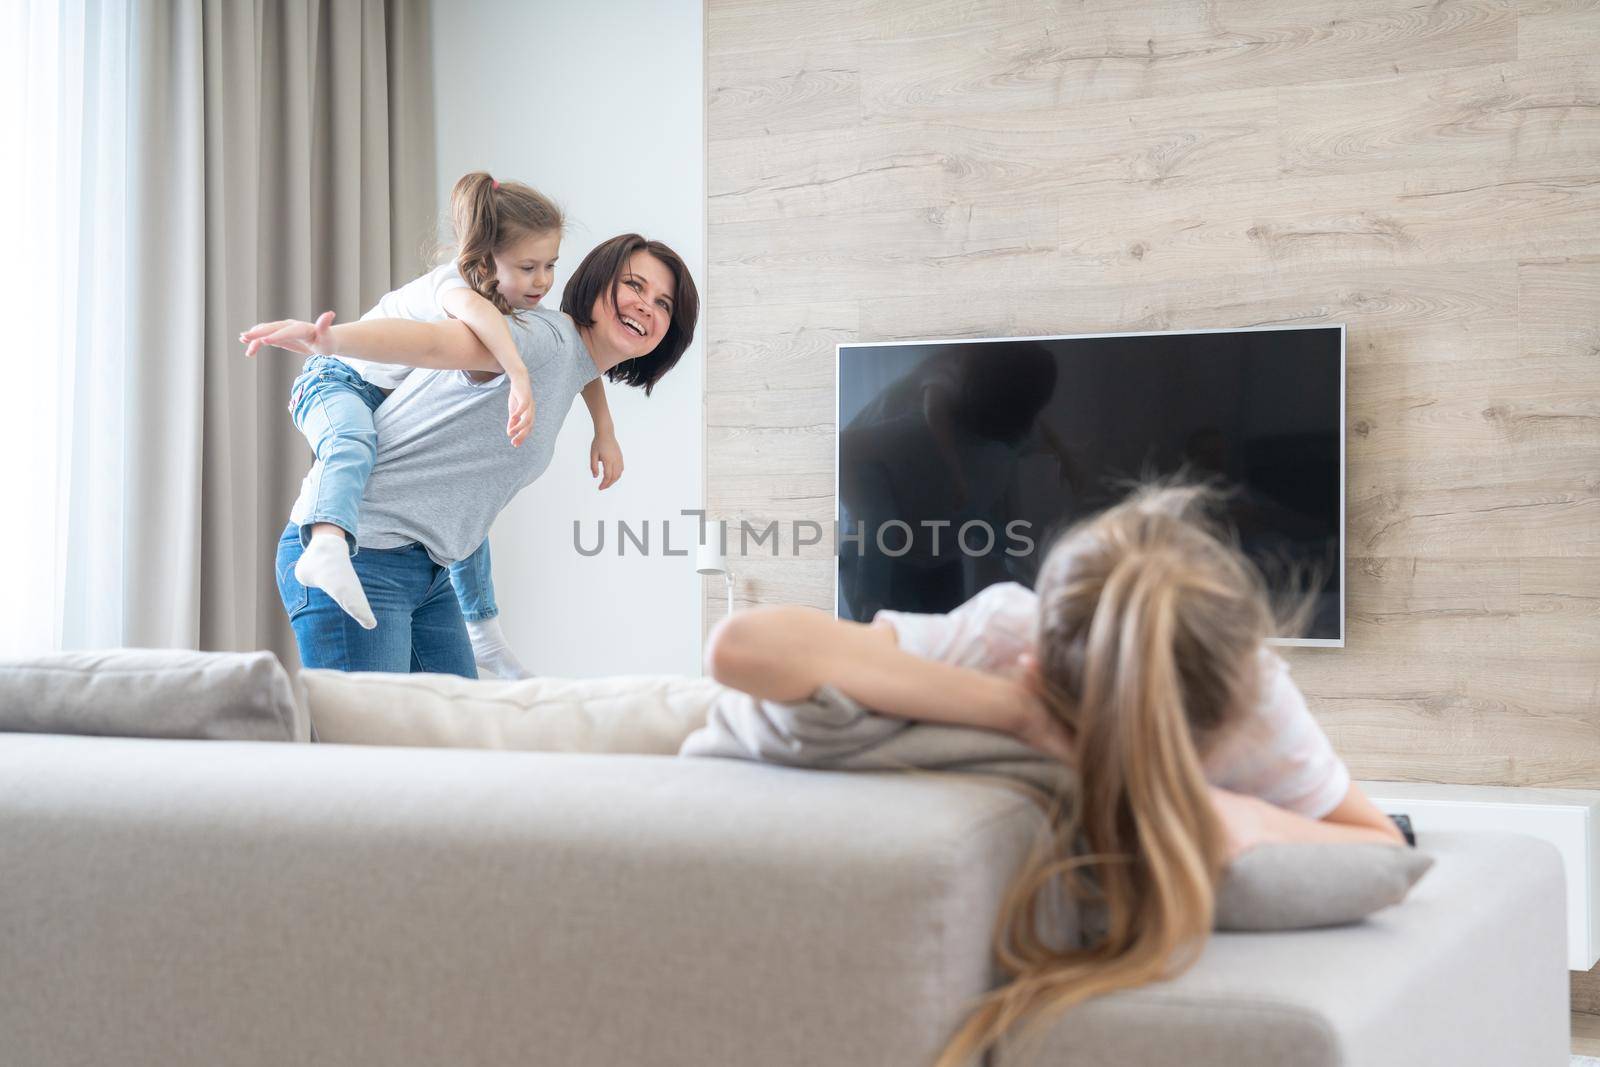 Preteenage sad girl sitting on a couch while mother having fun with sister, jealousy concept by Mariakray